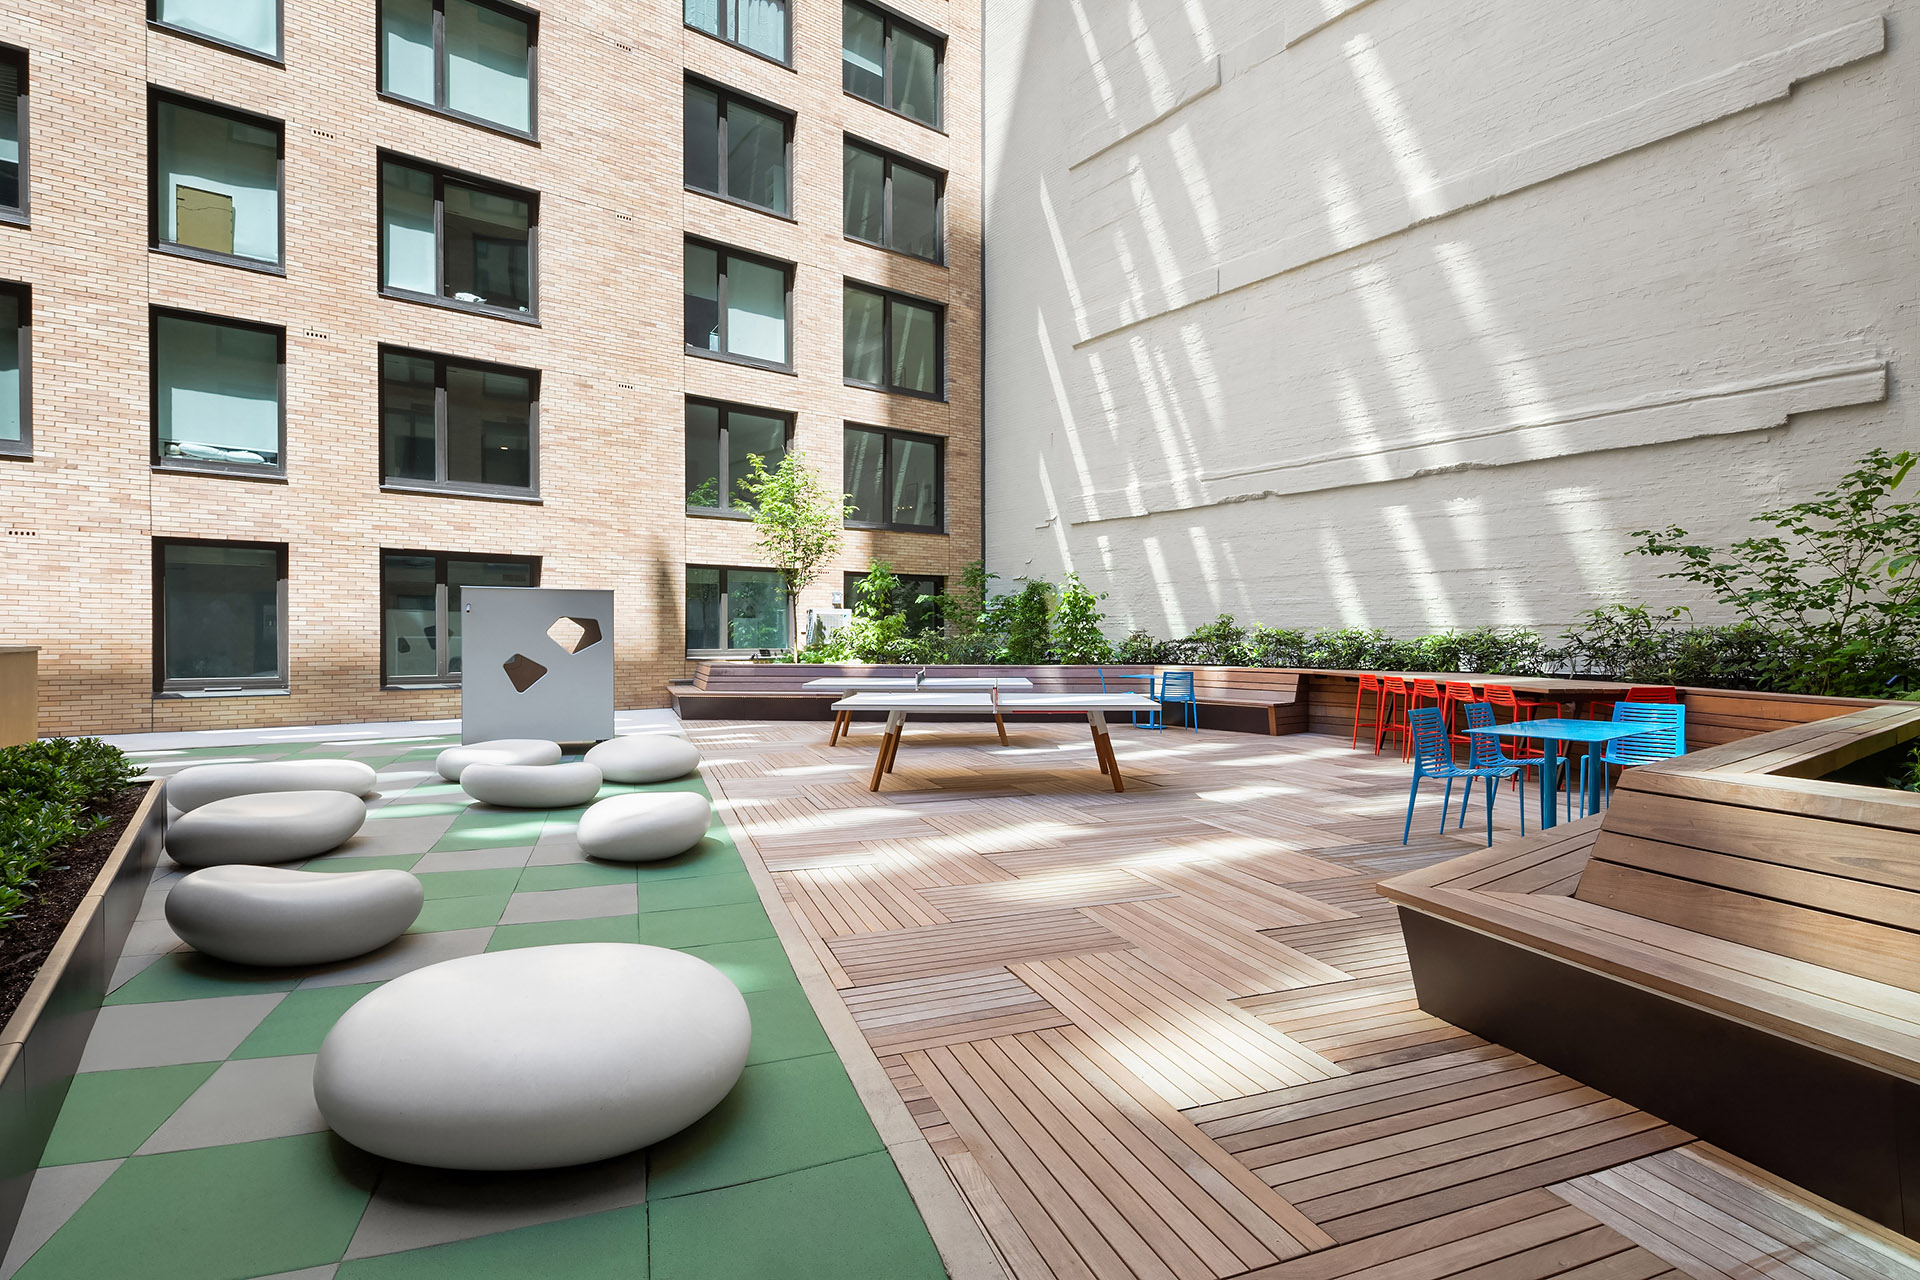 Pierrepont Courtyard featuring ample seating, ping pong tables and a play-space for children